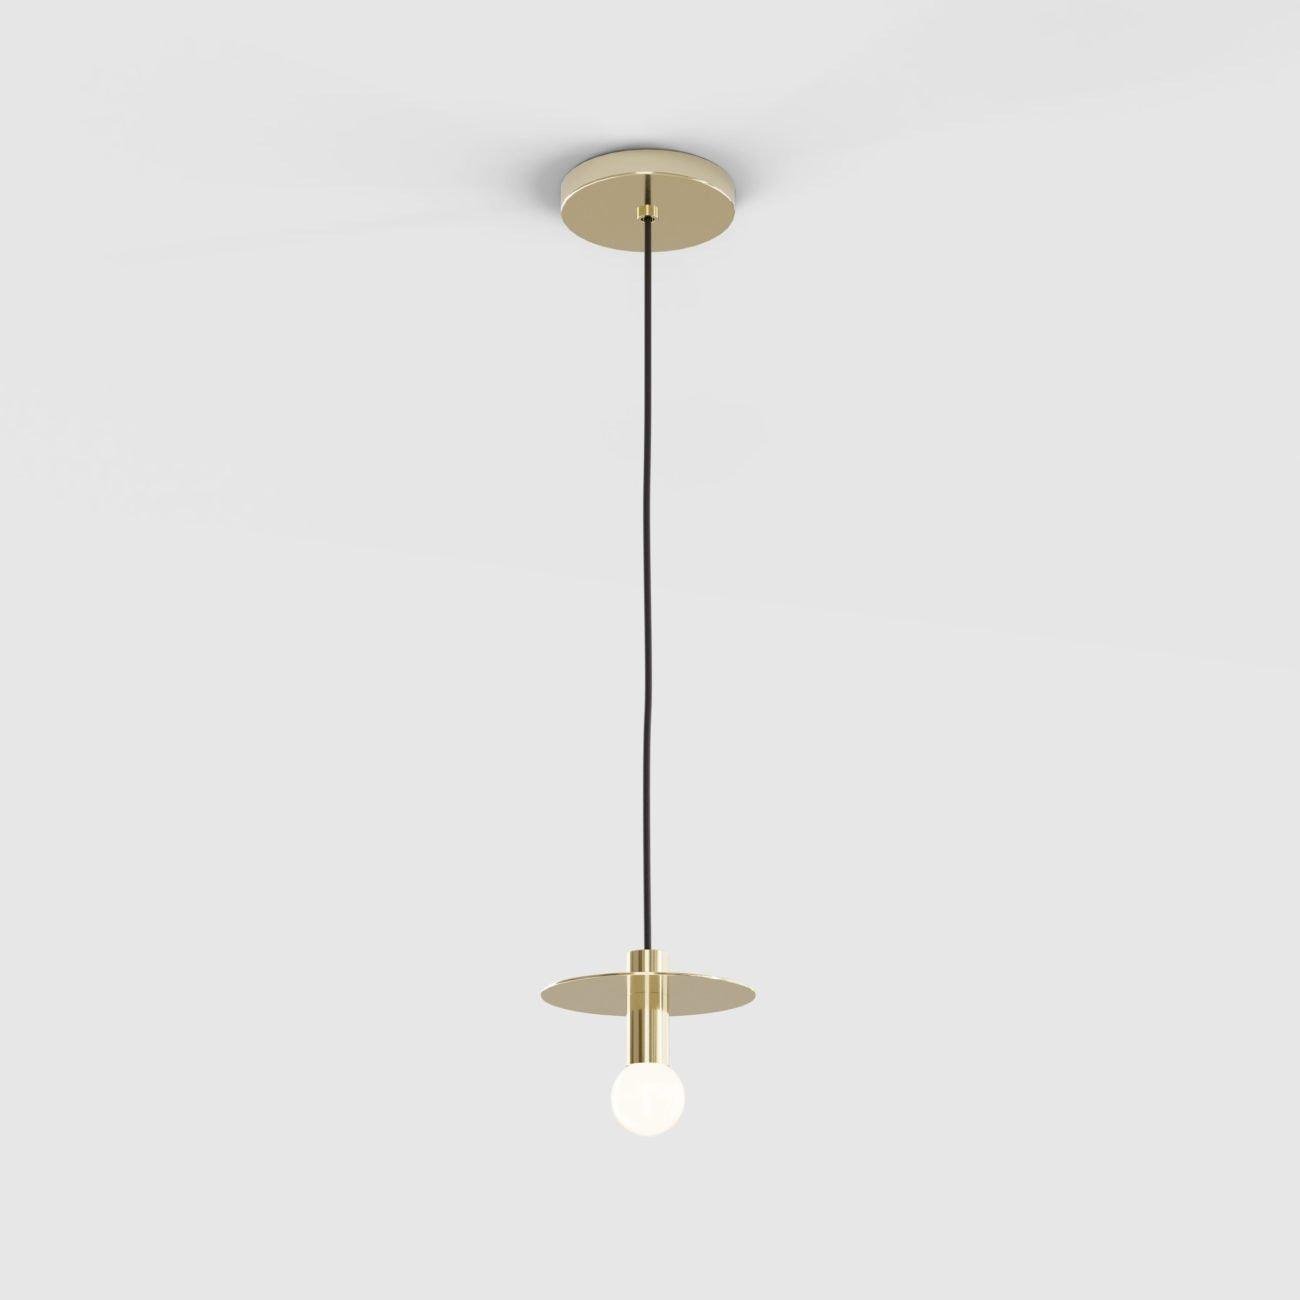 Dot Suspension Lights in Brass, with a diameter of 9 inches and a height of 5 inches (or 23 cm x 13 cm).